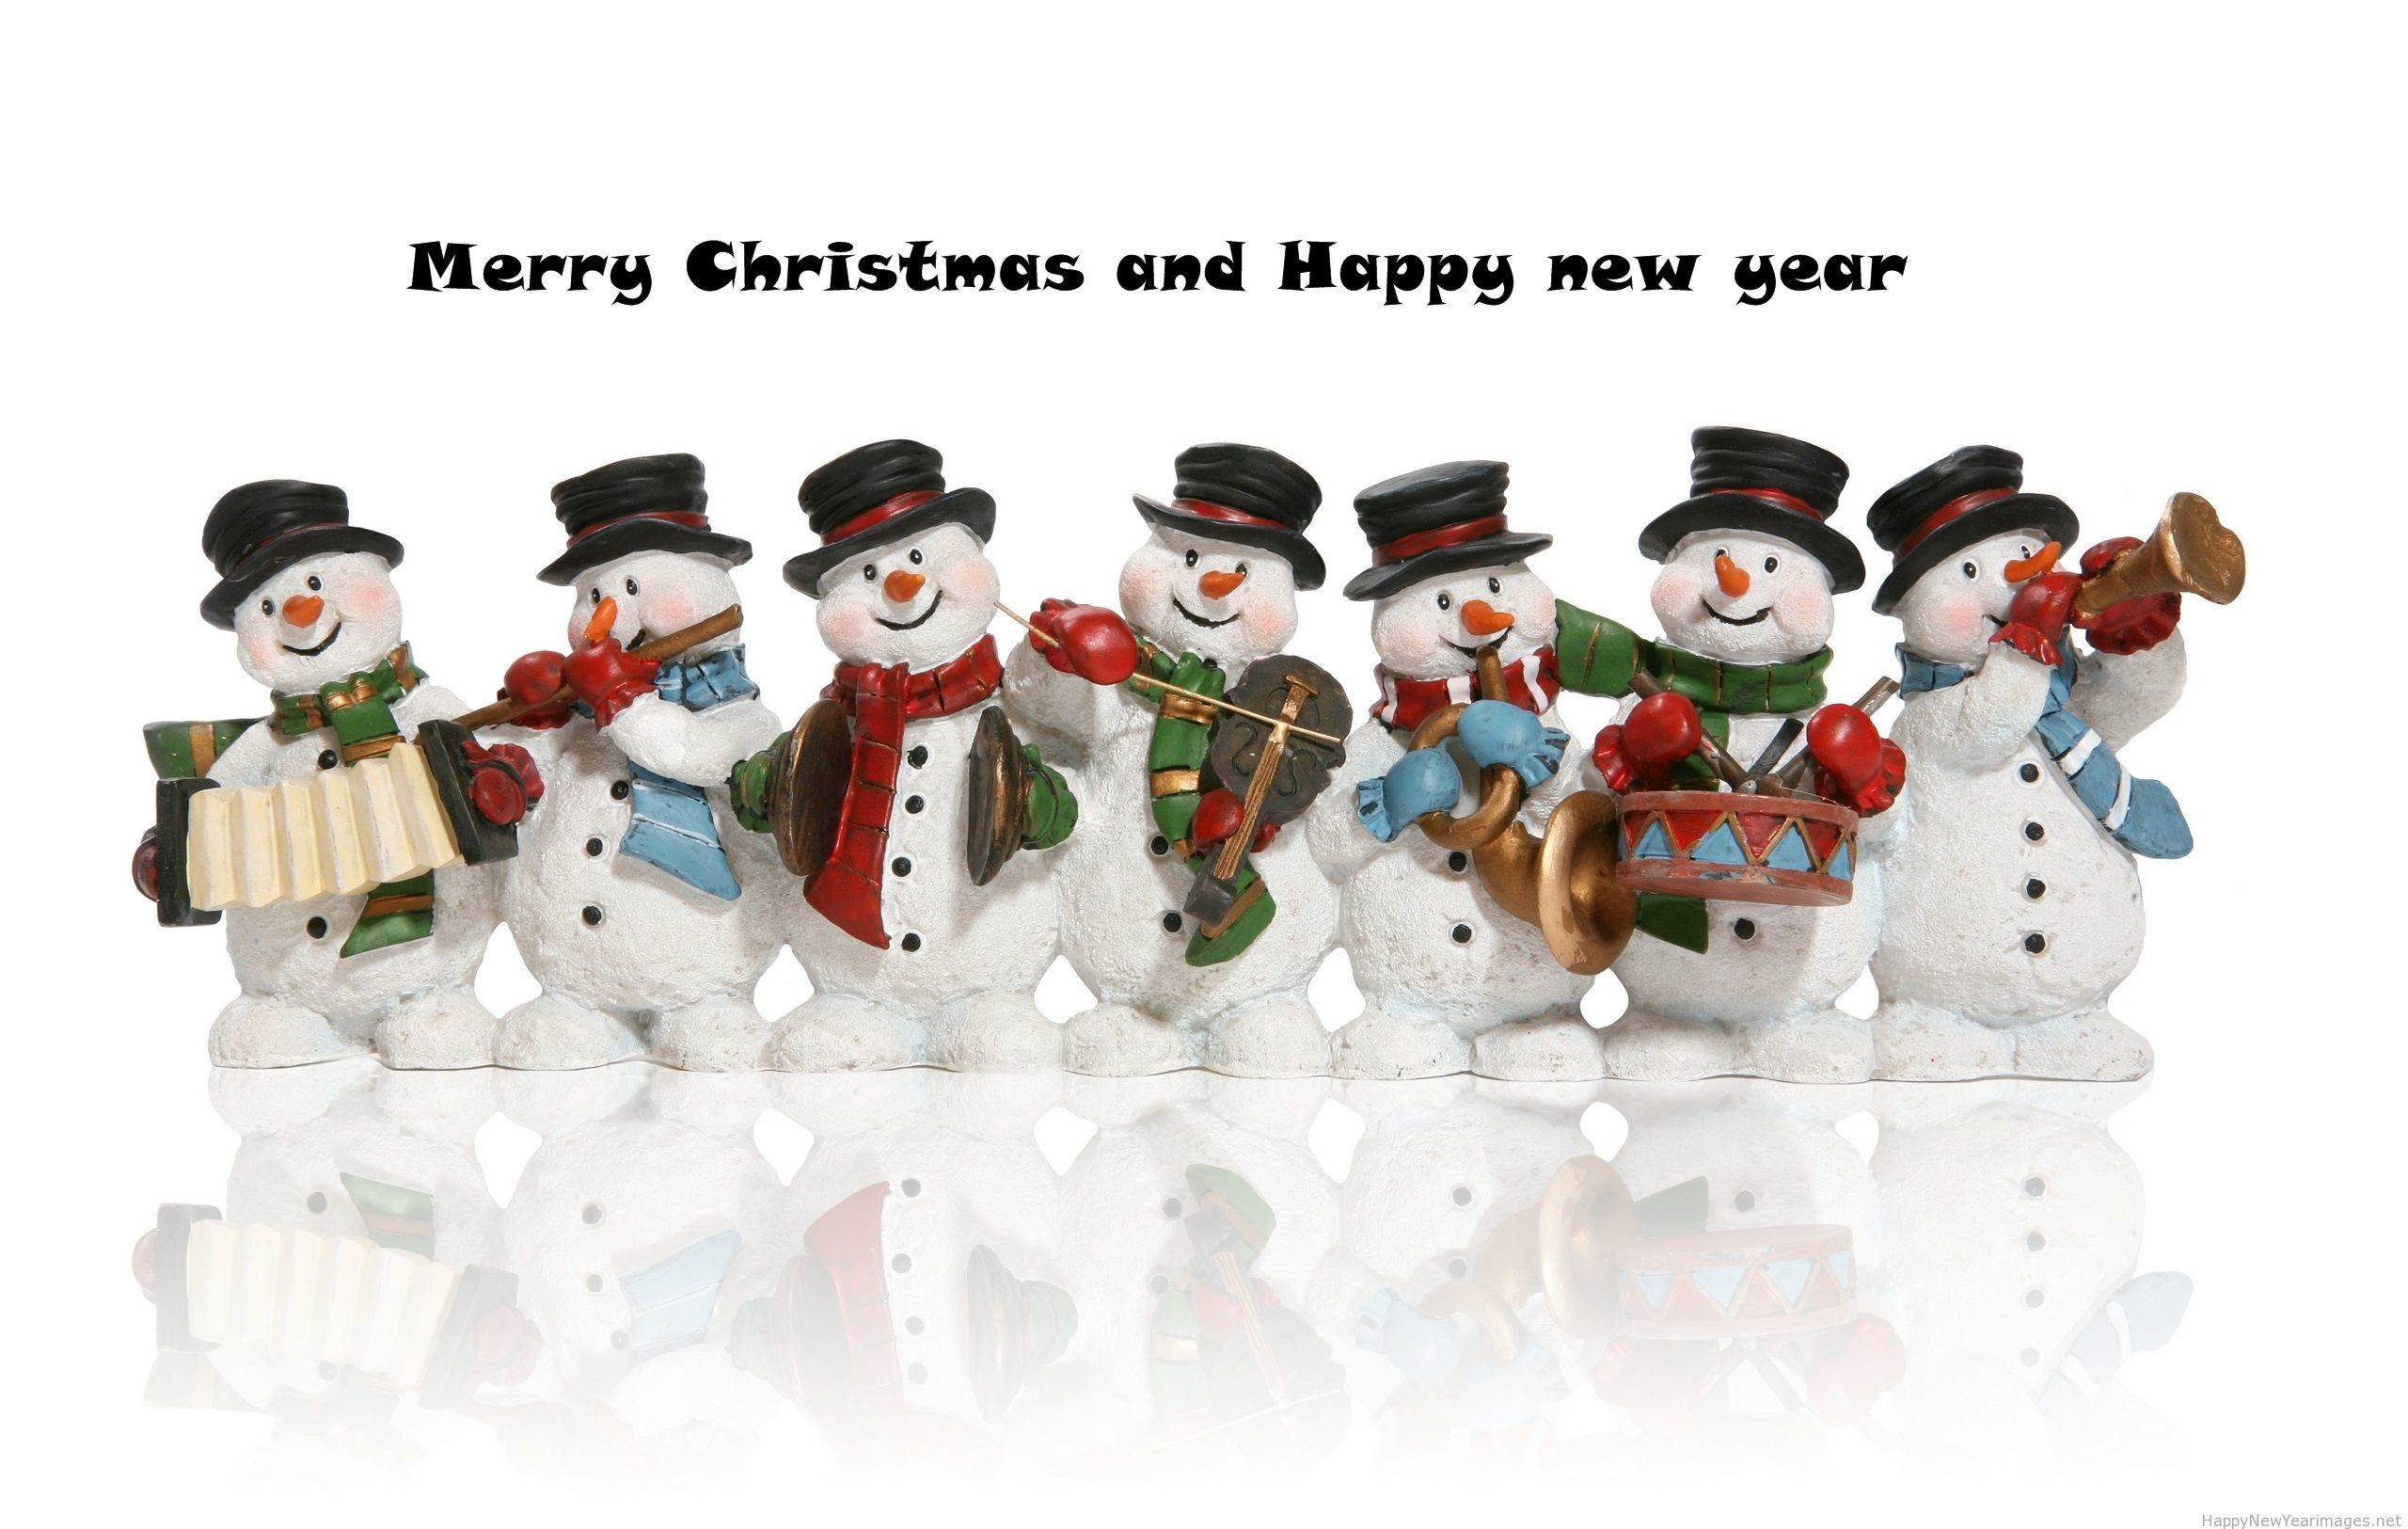 2560x1625 merry-christmas-and-happy-new-year-wishes